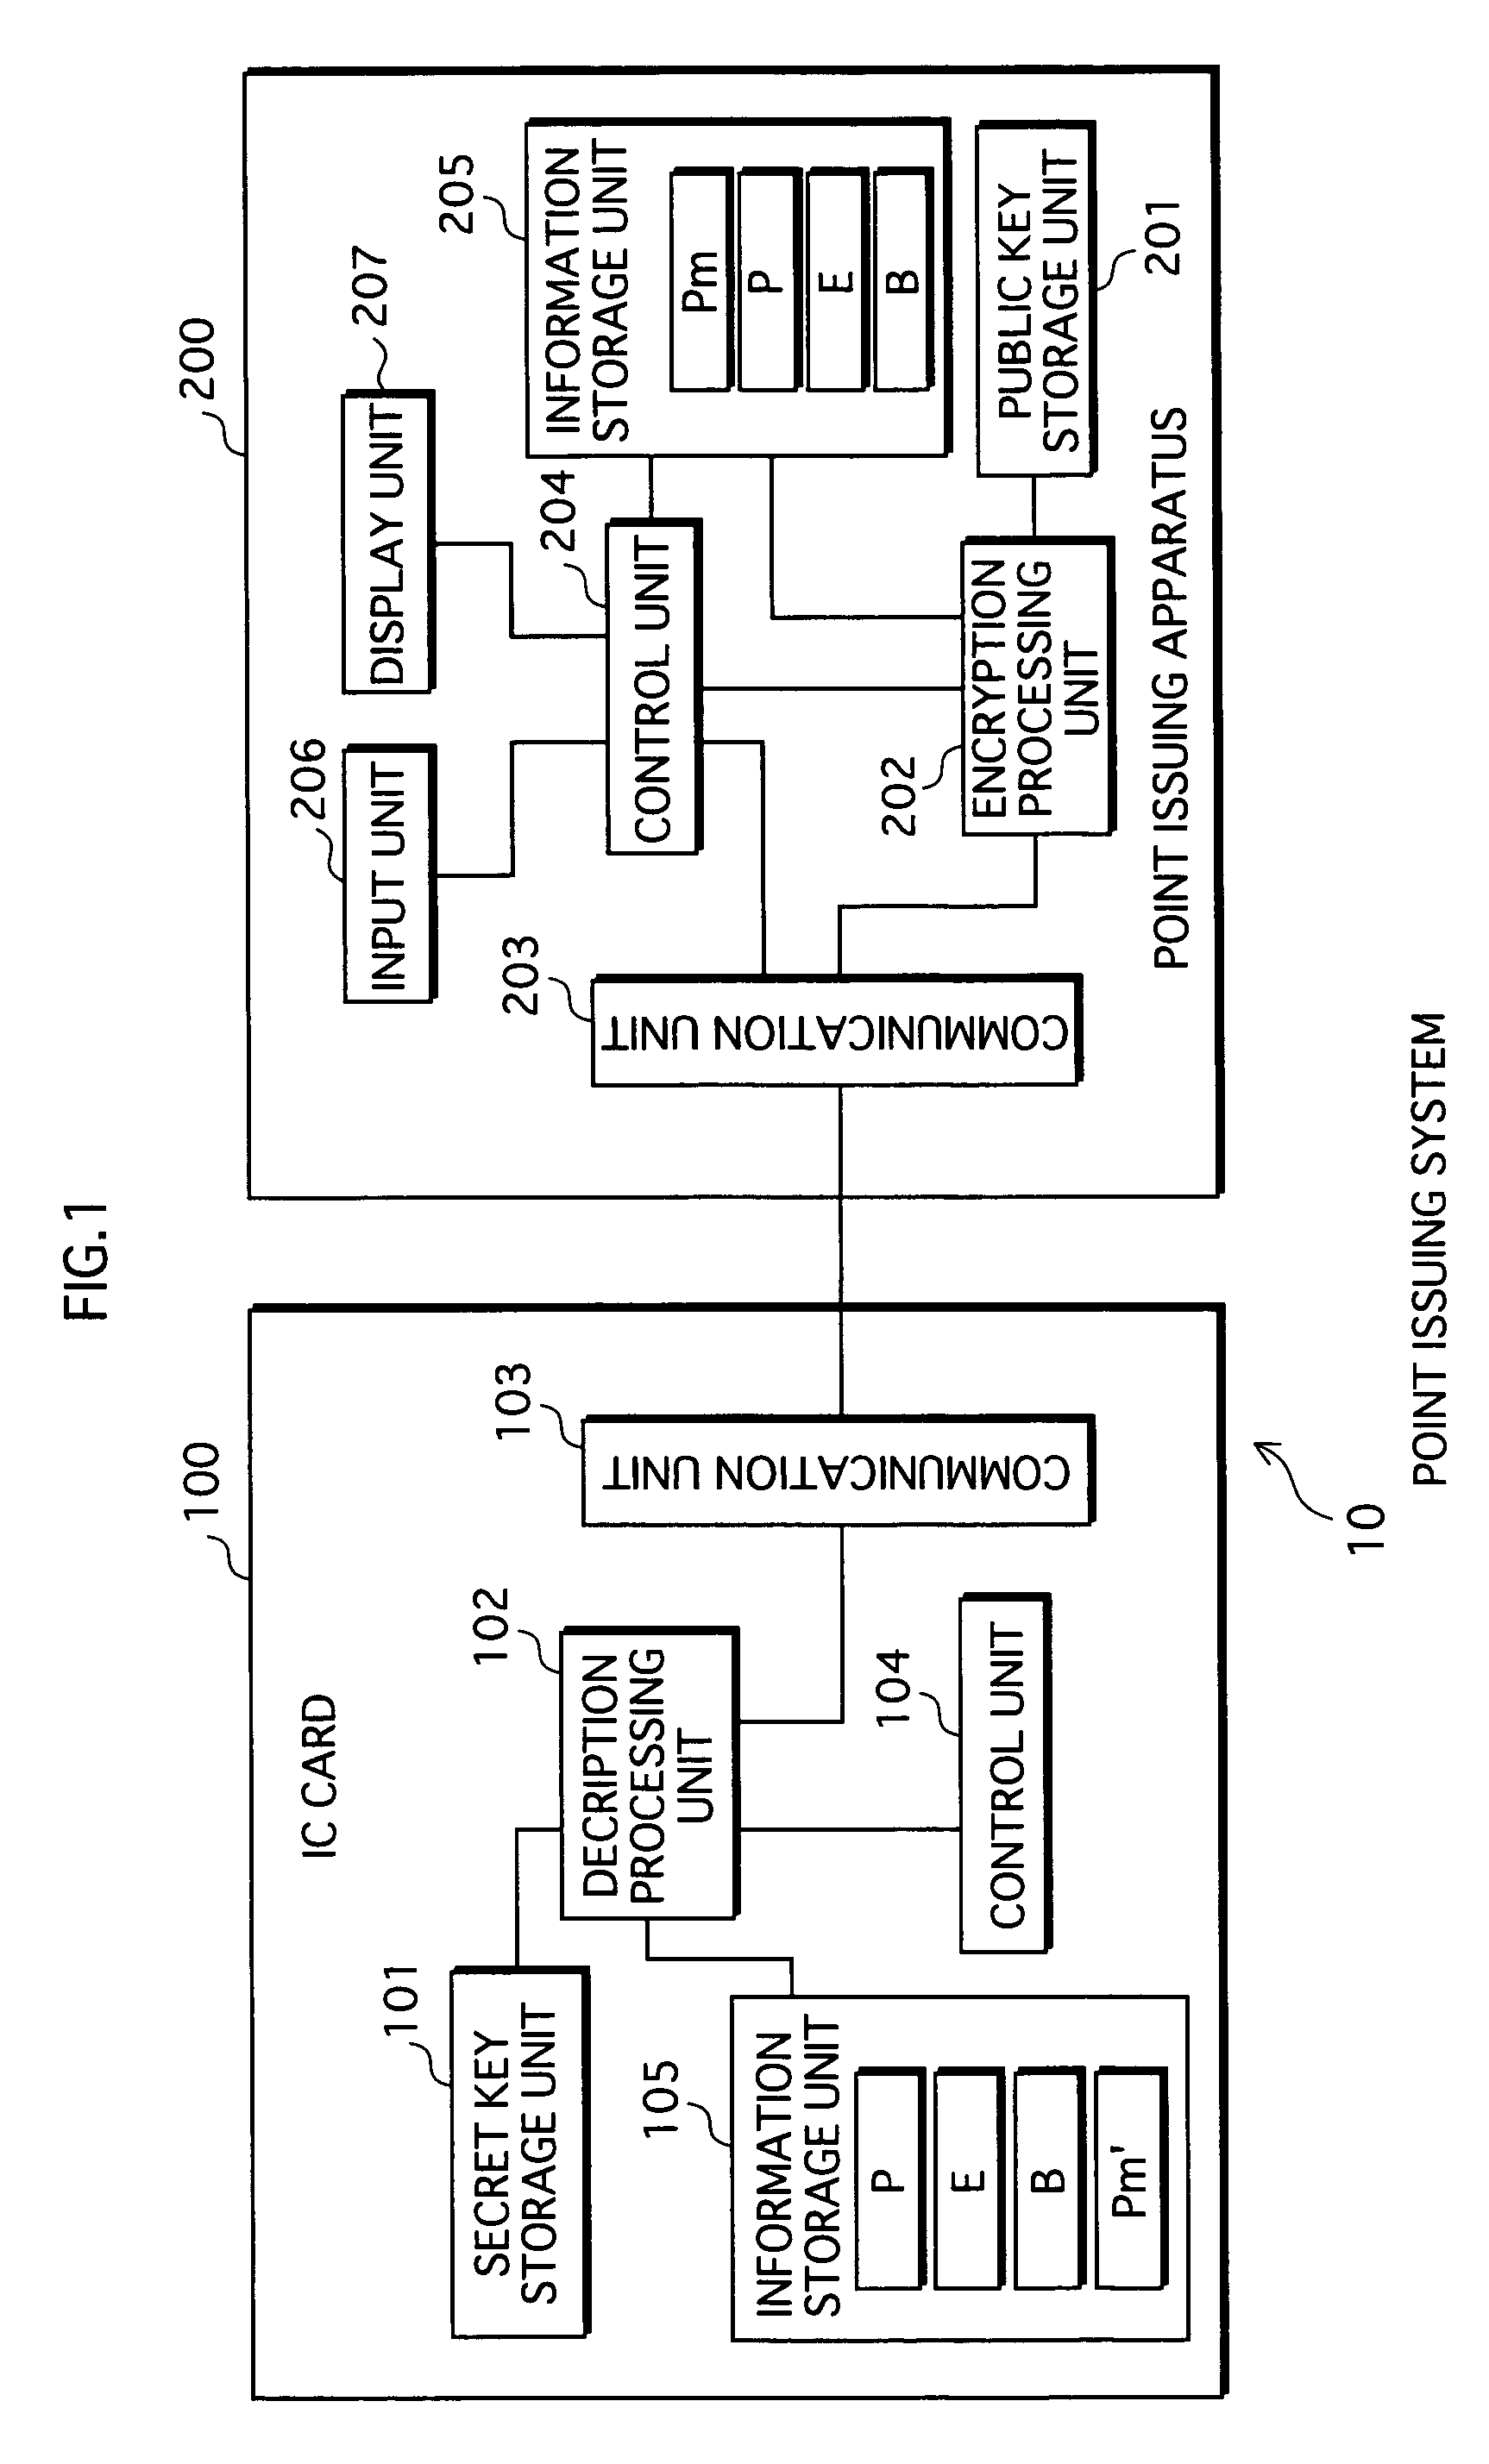 Elliptic curve exponentiation apparatus that can counter differential fault attack, and information security apparatus